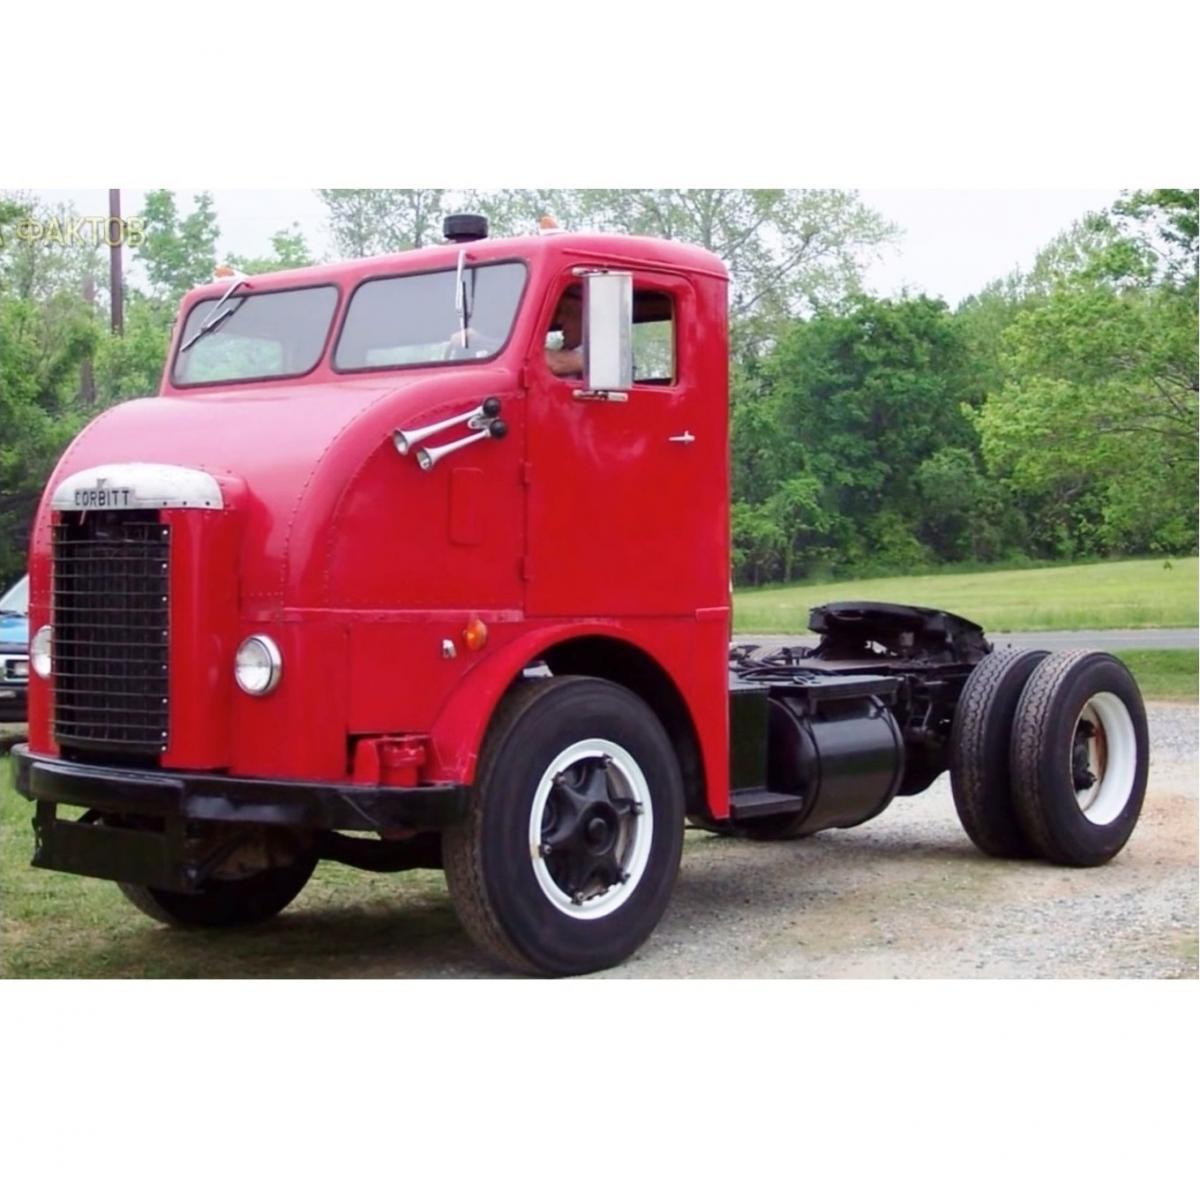 The strangest American truck of the 50s